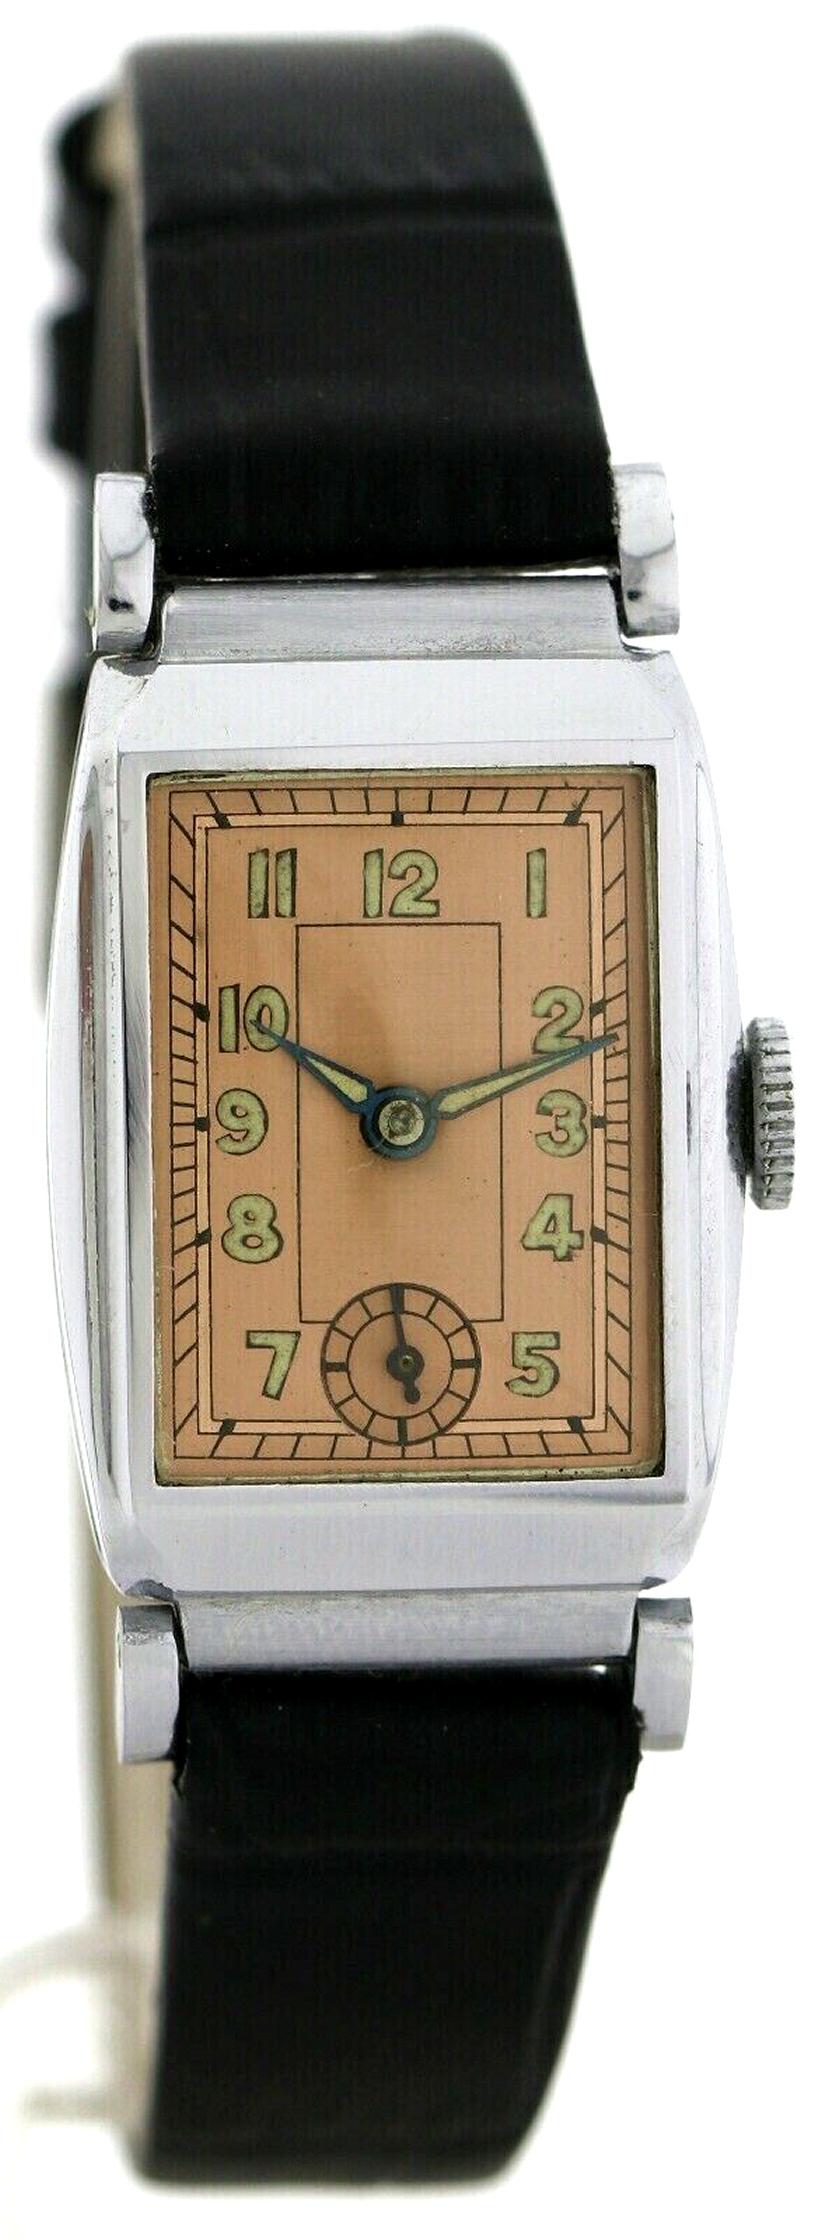 For those gents out there who desire a less than generic looking watch, who aspire for something not only classy but very distinctively Art Deco then this maybe the timepiece for you! This is a very rare opportunity to acquire a perfect condition